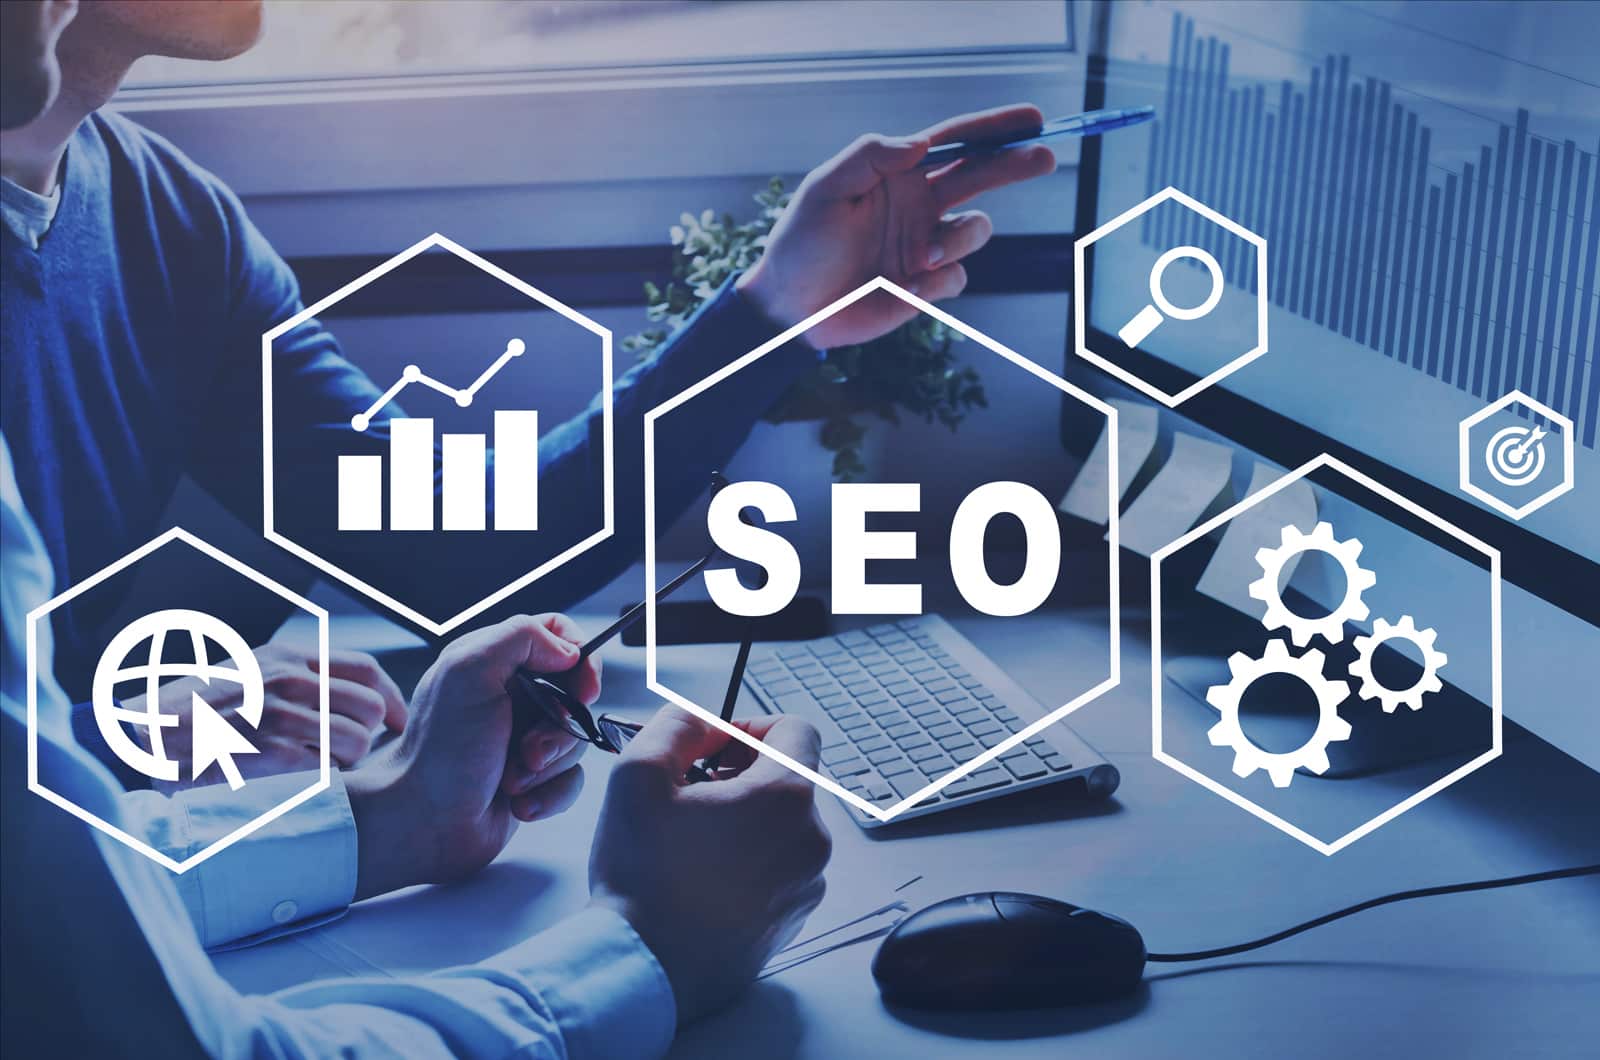 Analyst explains SEO report to a business owner